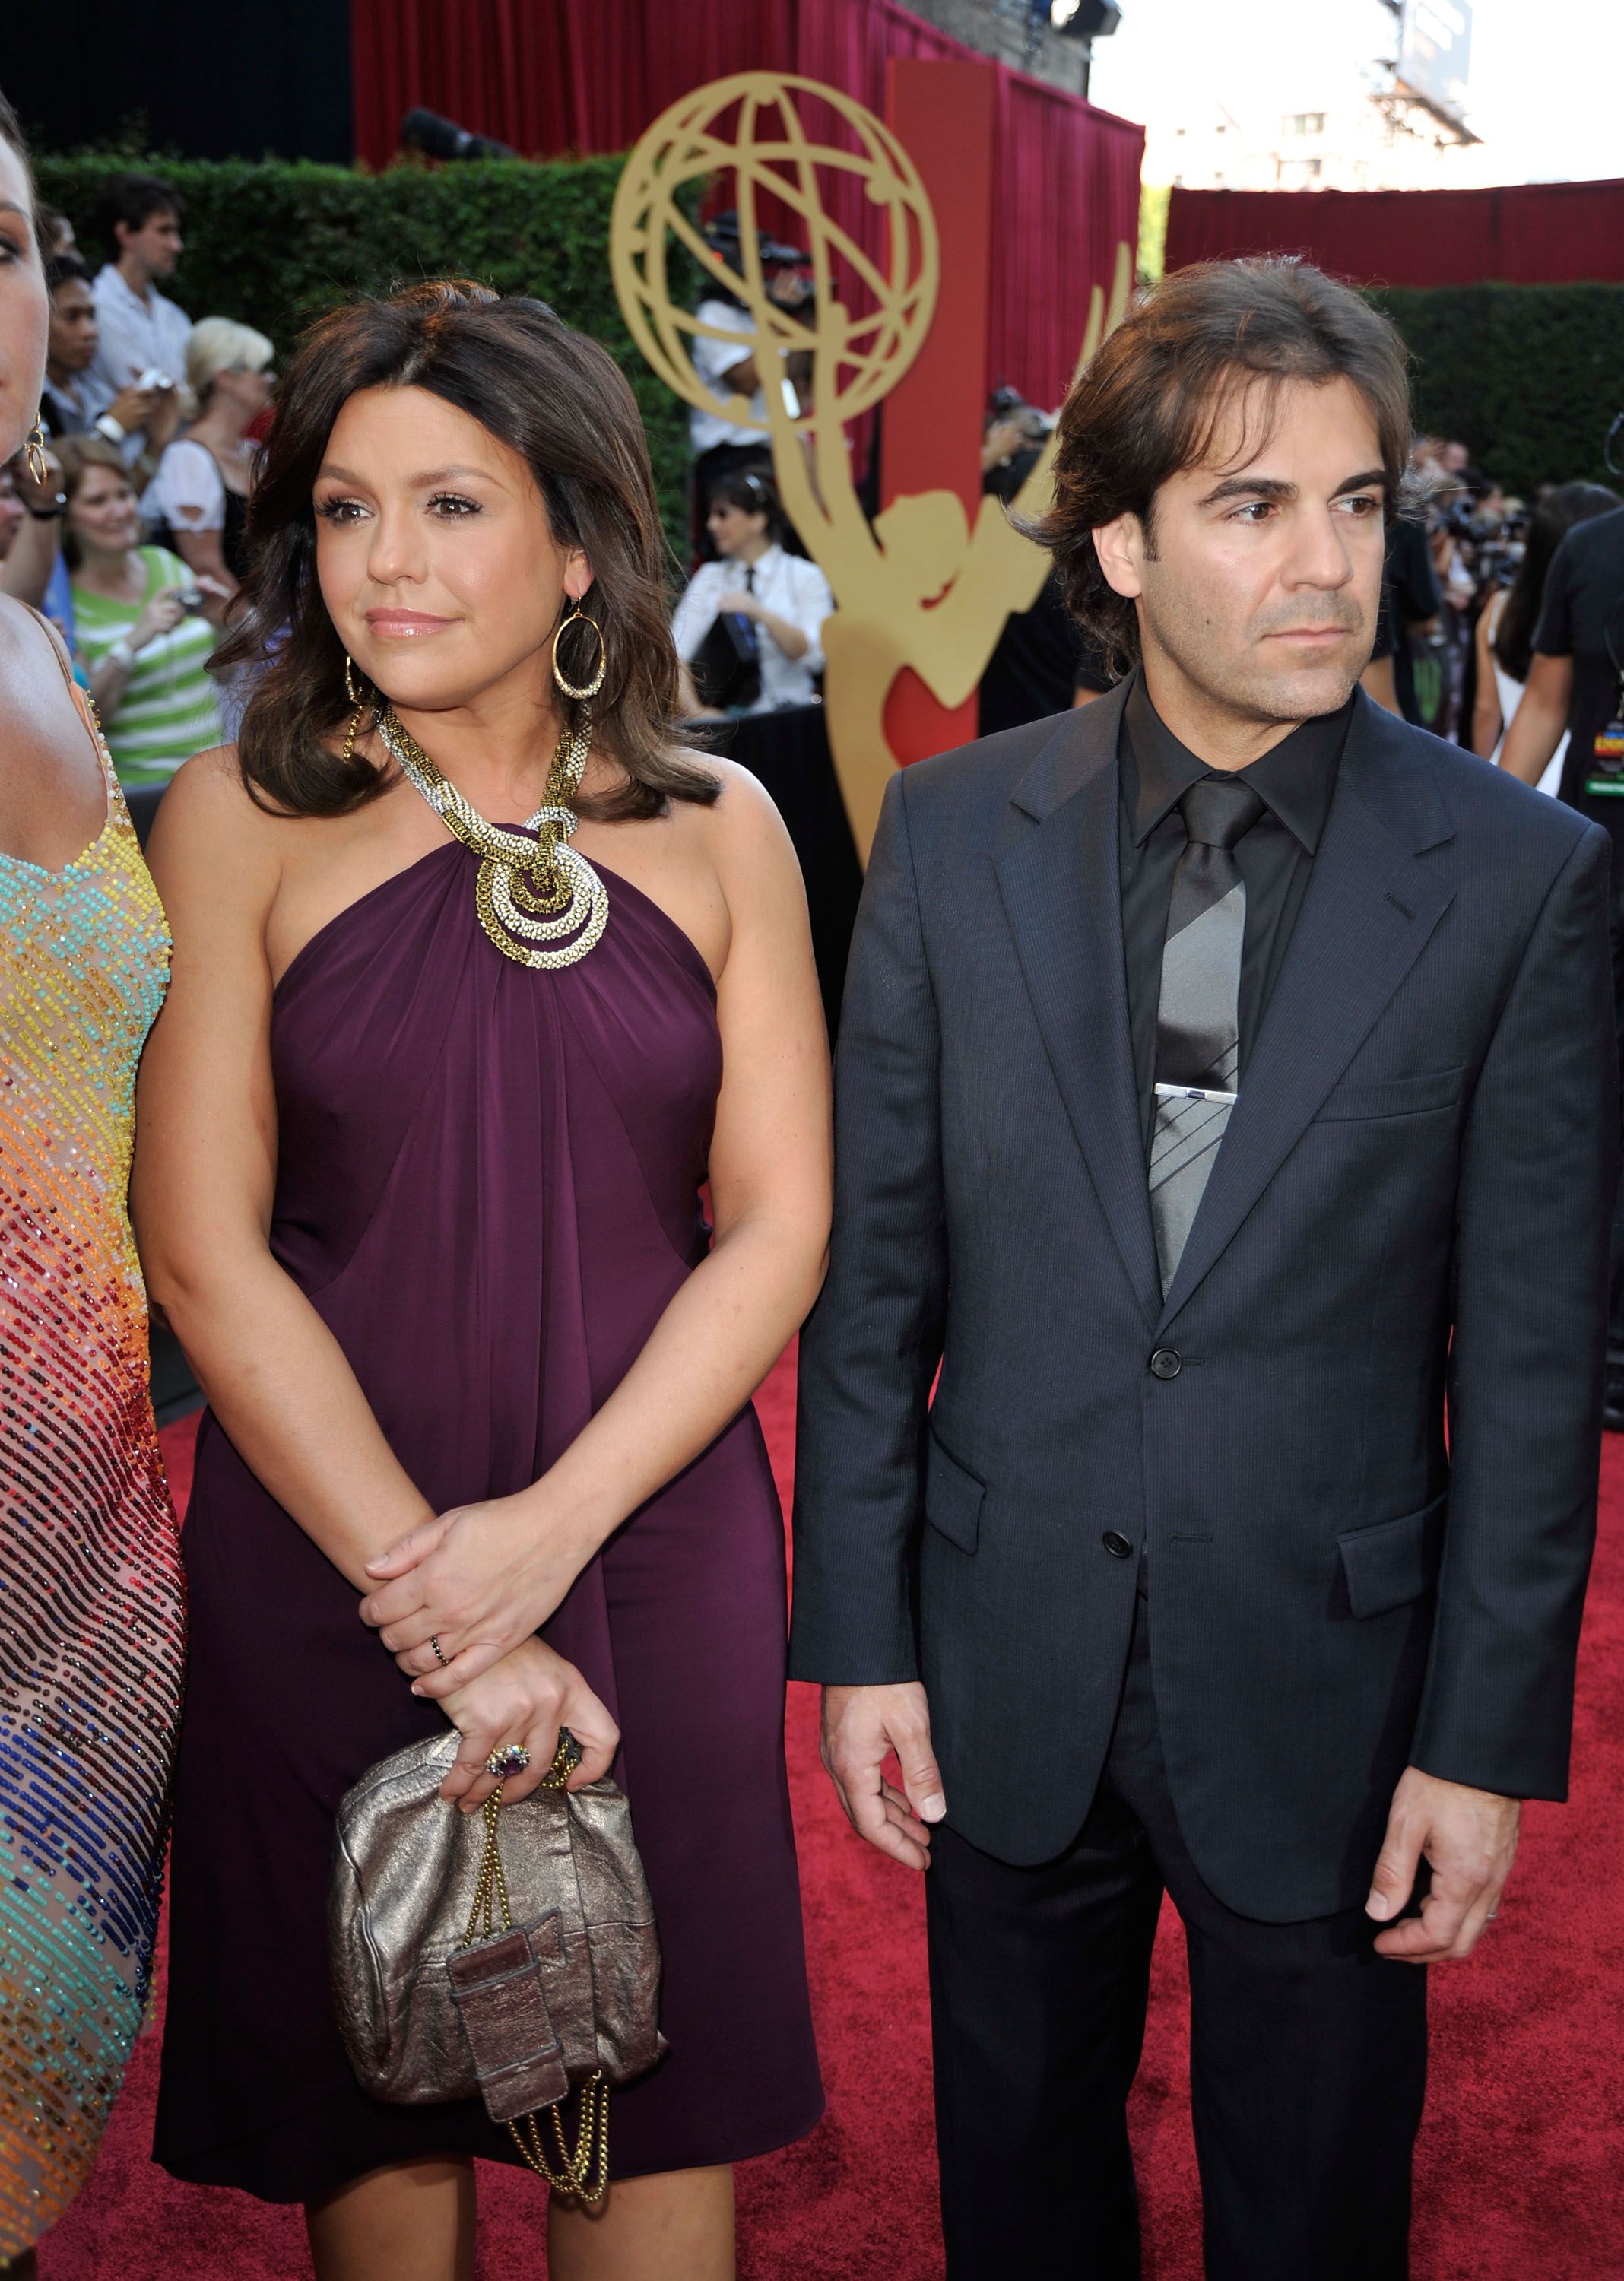 Rachael Ray and John Cusimano at the 36th Annual Daytime Emmy Awards in 2009 in Los Angeles | Source: Getty Images